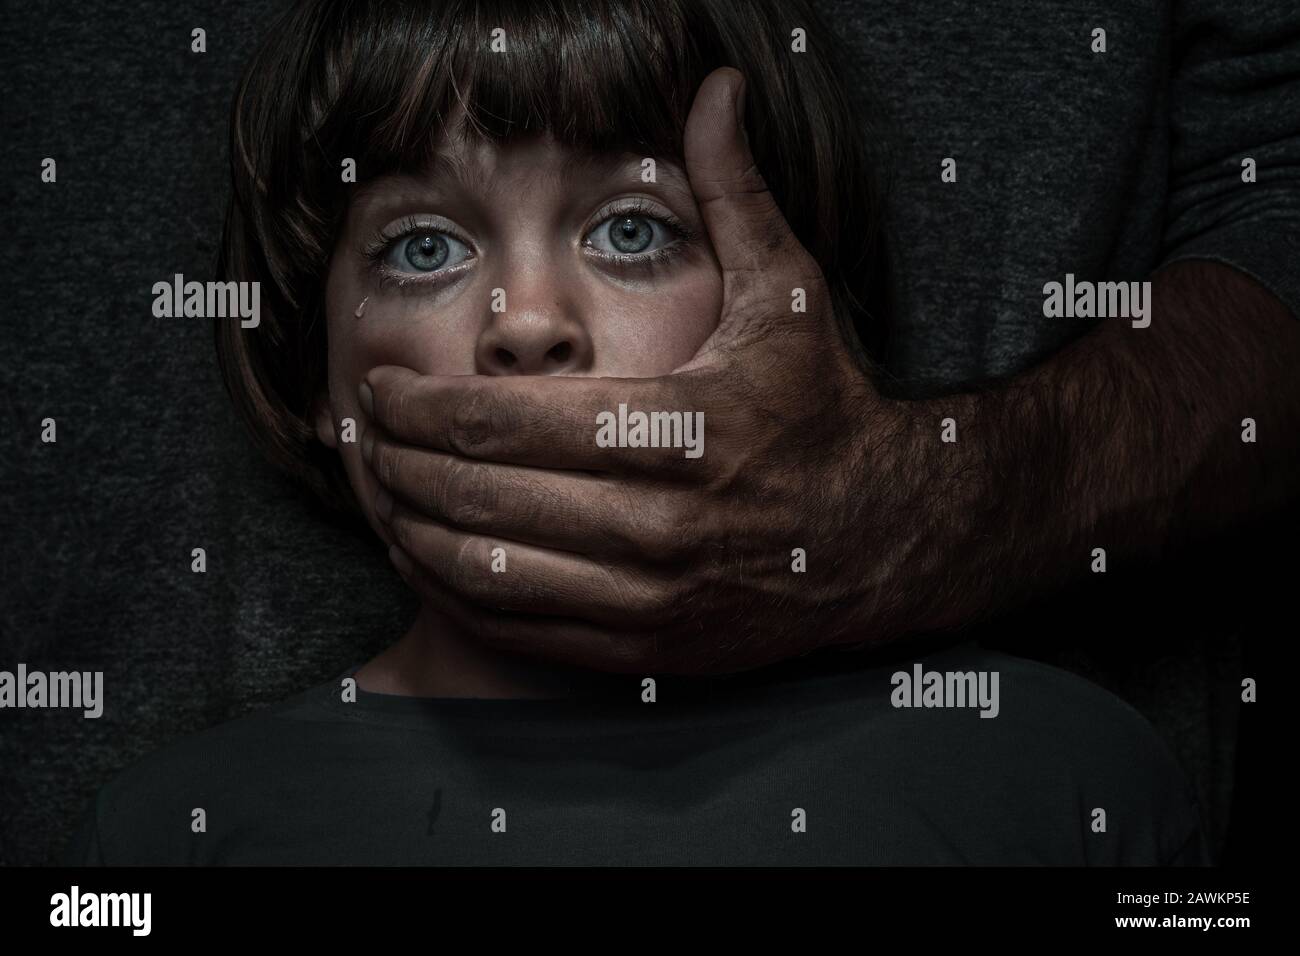 Child abuse concept. Portrait of a little boy hold by an aggresive adult Stock Photo